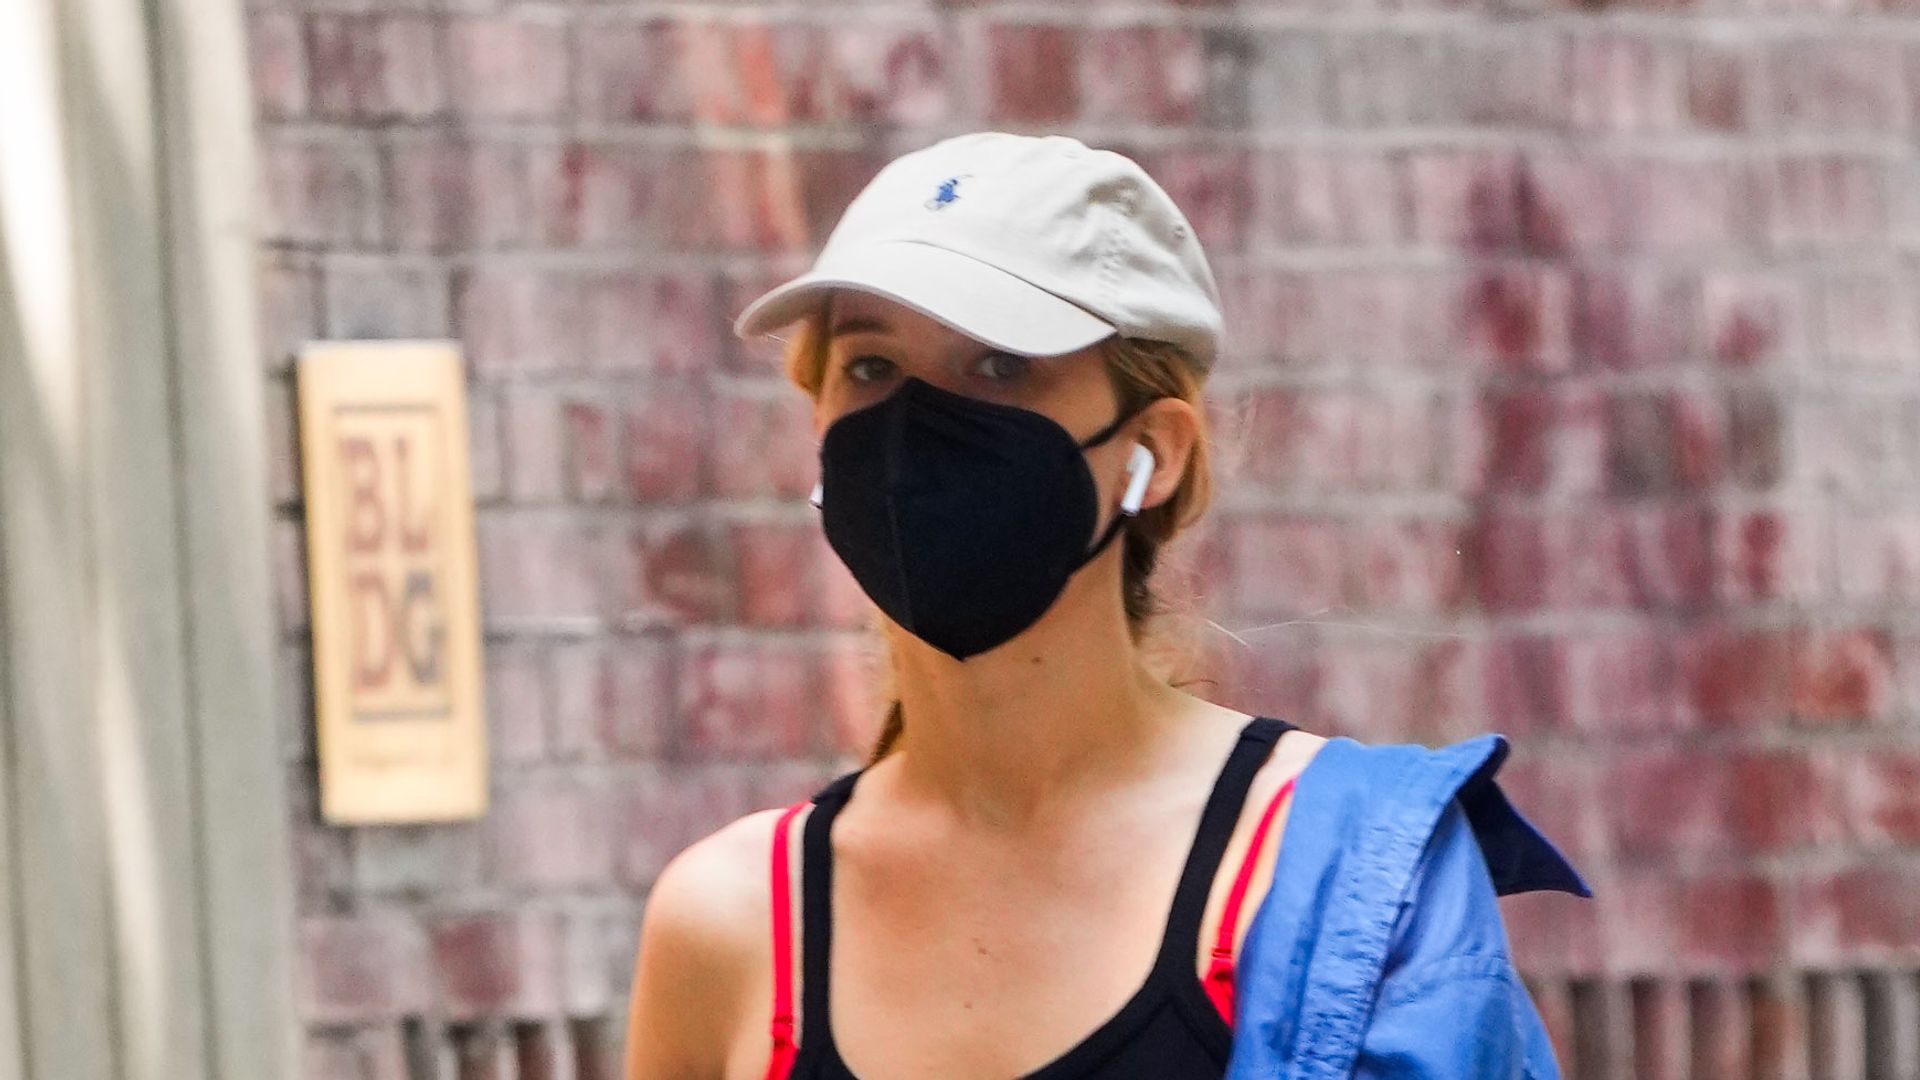 Jennifer Lawrence turns heads in casual chic ensemble as she dons a mask to protect from bad air quality in NYC